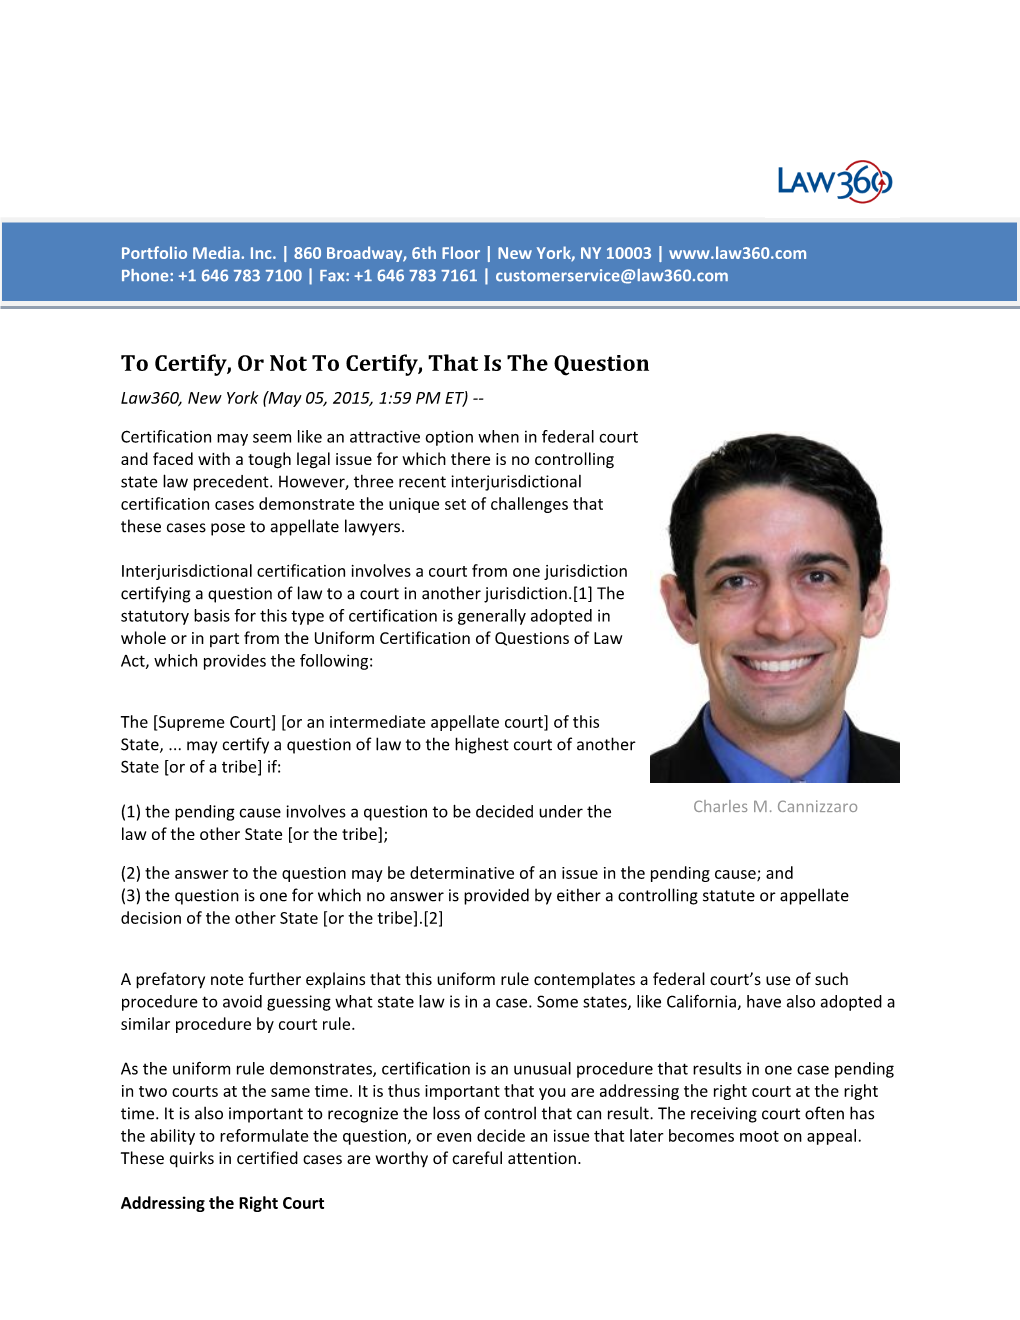 To Certify, Or Not to Certify, That Is the Question Law360, New York (May 05, 2015, 1:59 PM ET)